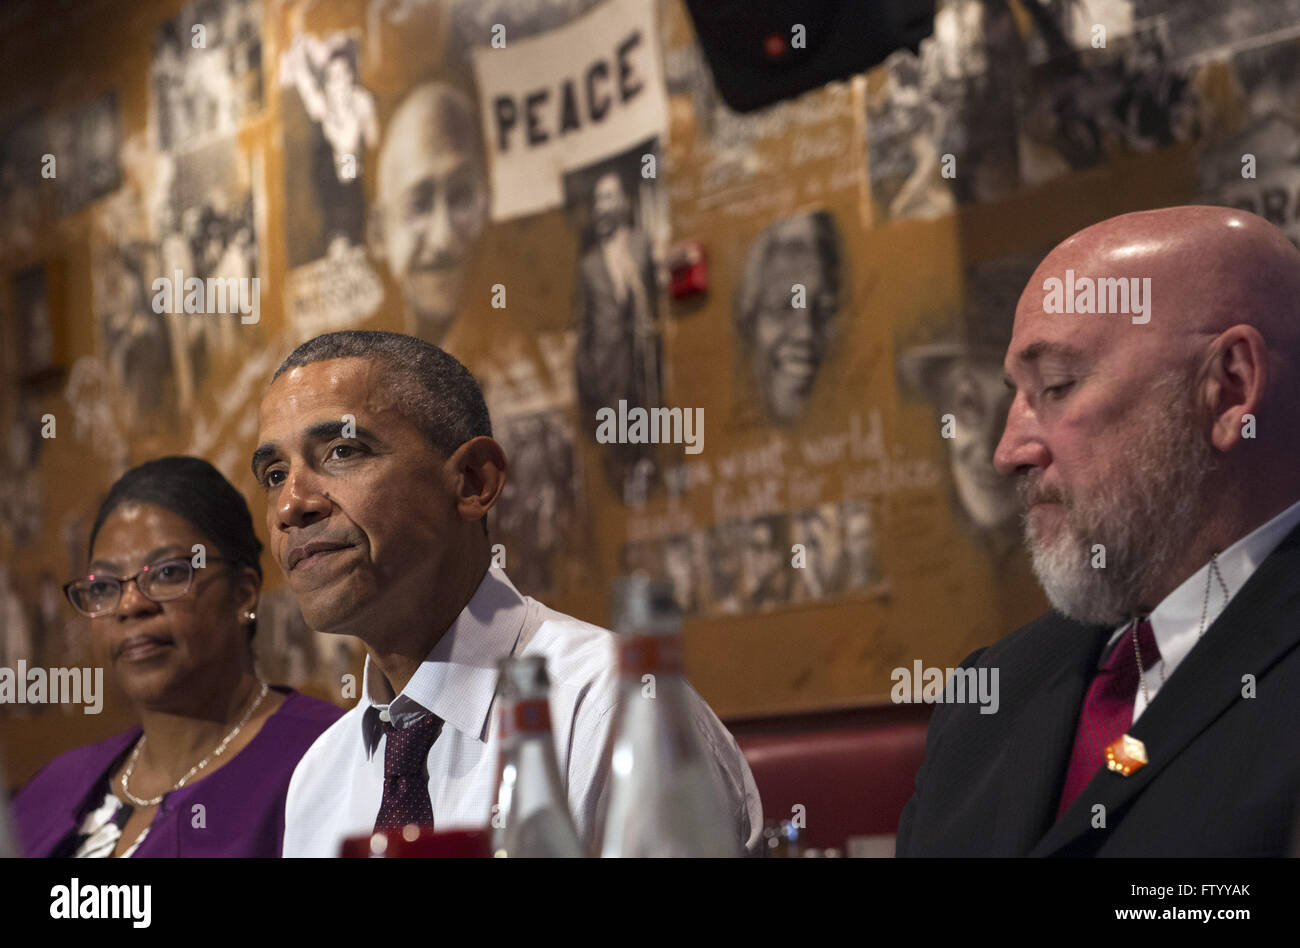 Washington, District of Columbia, USA. 30th Mar, 2016. United States President Barack Obama speaks to the media after having lunch with formerly incarcerated individuals who have received commutations, including Ramona Brant (L) and Phillip Emmert (R), at Bus Boys and Poets restaurant in Washington, DC on March 30, 2016. Obama commuted 61 additional sentences today. Credit: Kevin Dietsch/Pool via CNP © Kevin Dietsch/CNP/ZUMA Wire/Alamy Live News Stock Photo